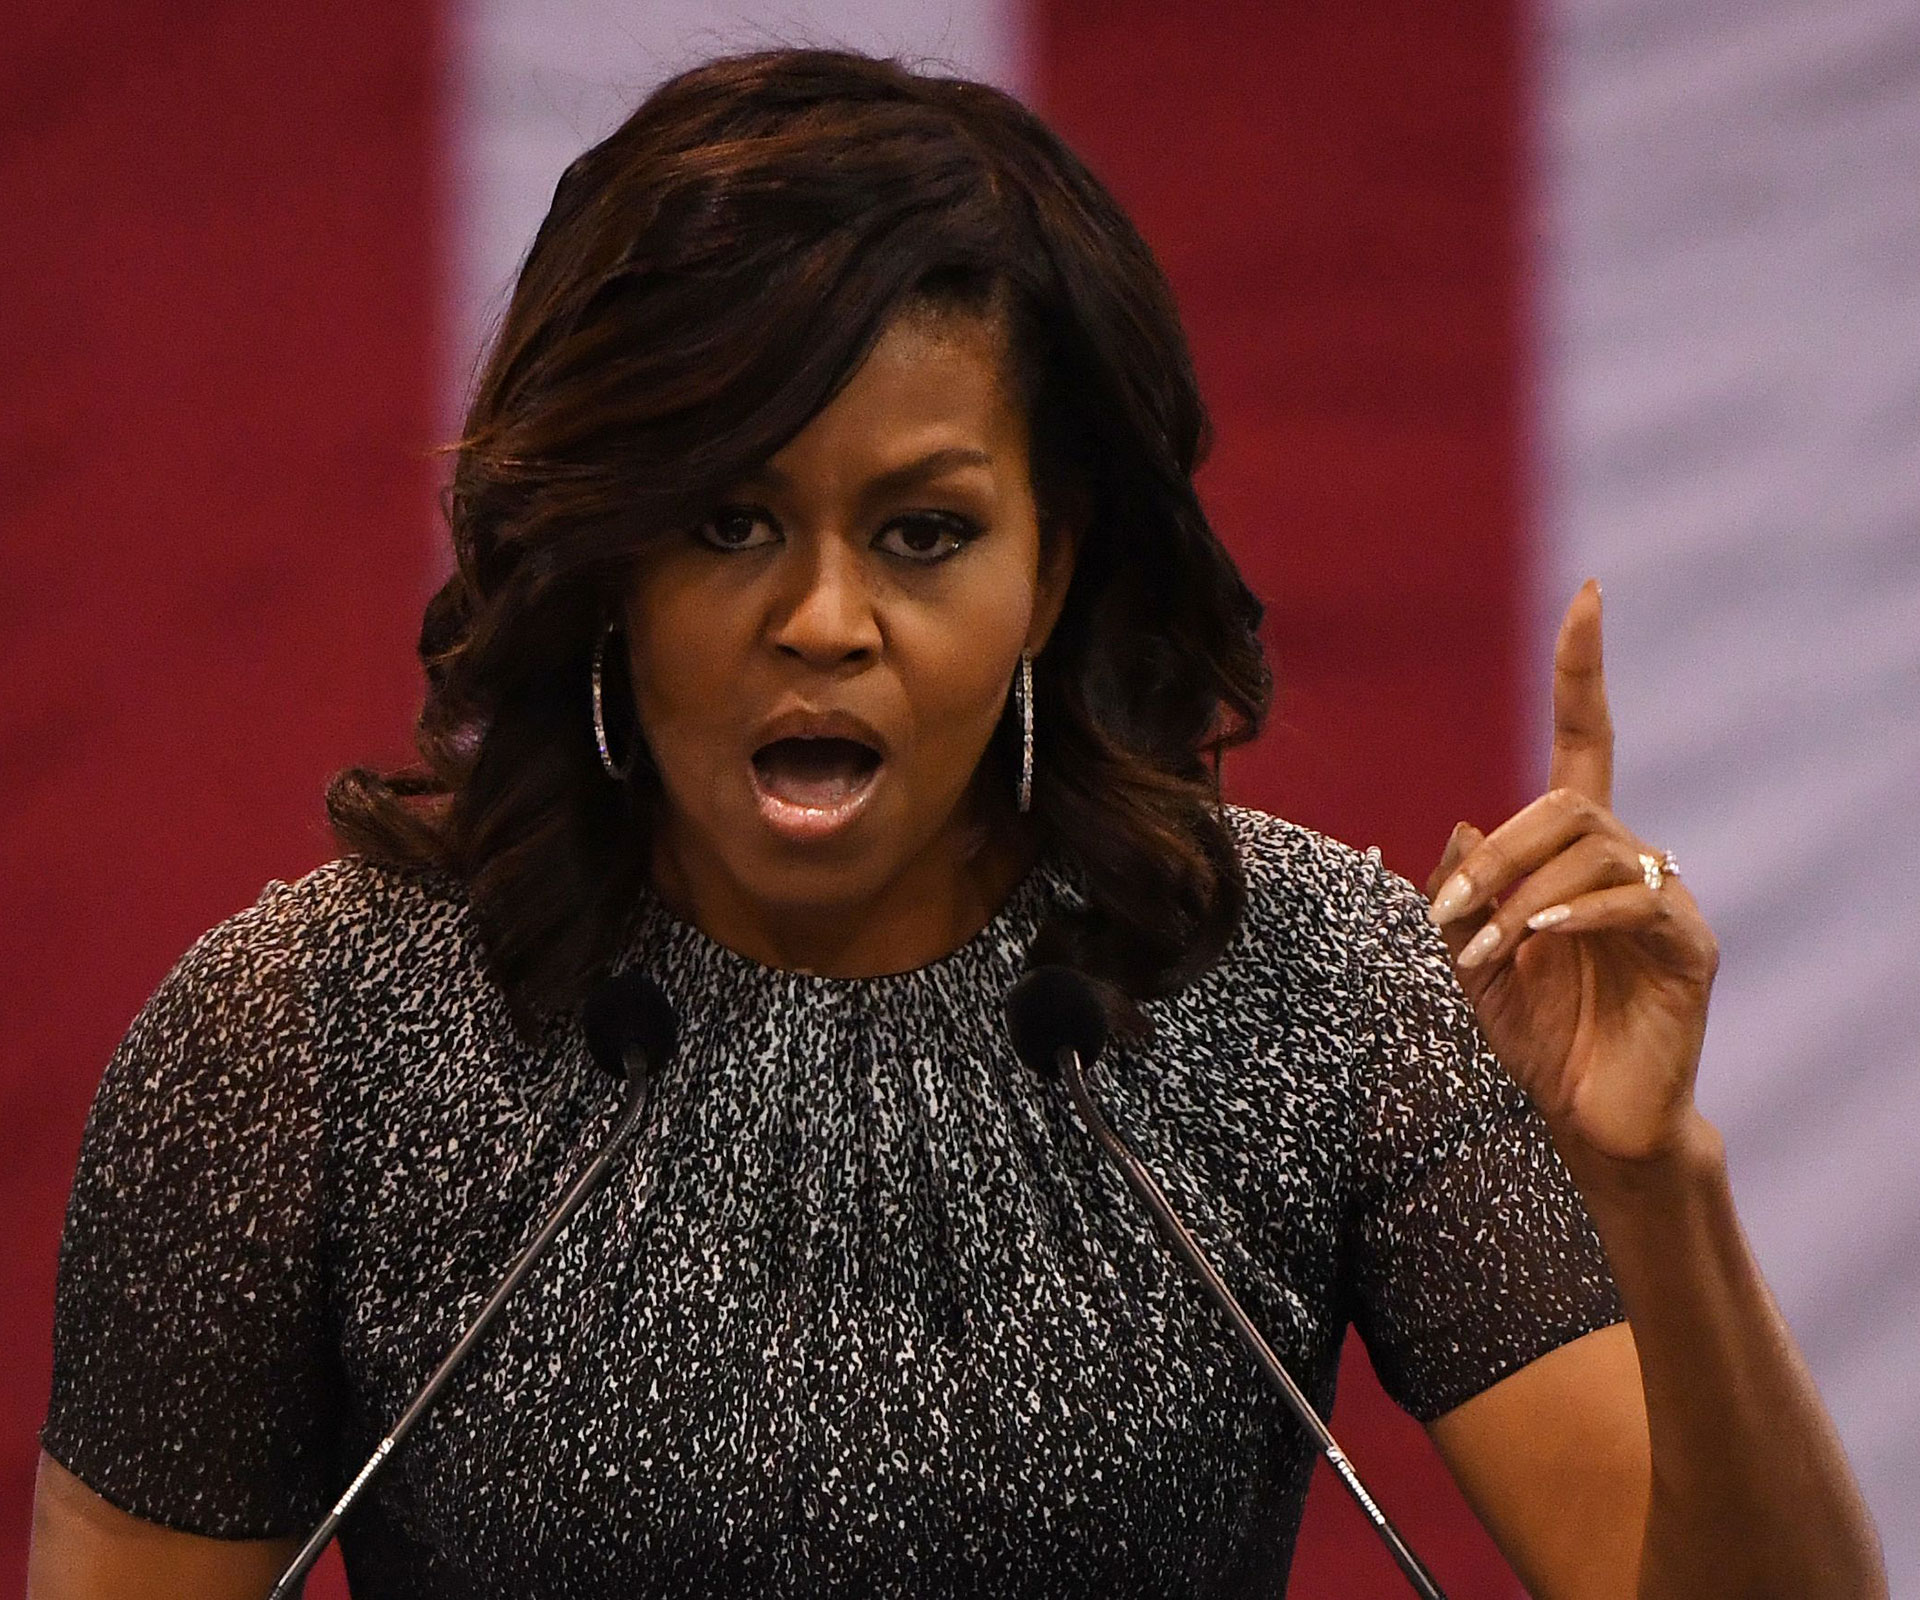 Michelle Obama for US president in 2020